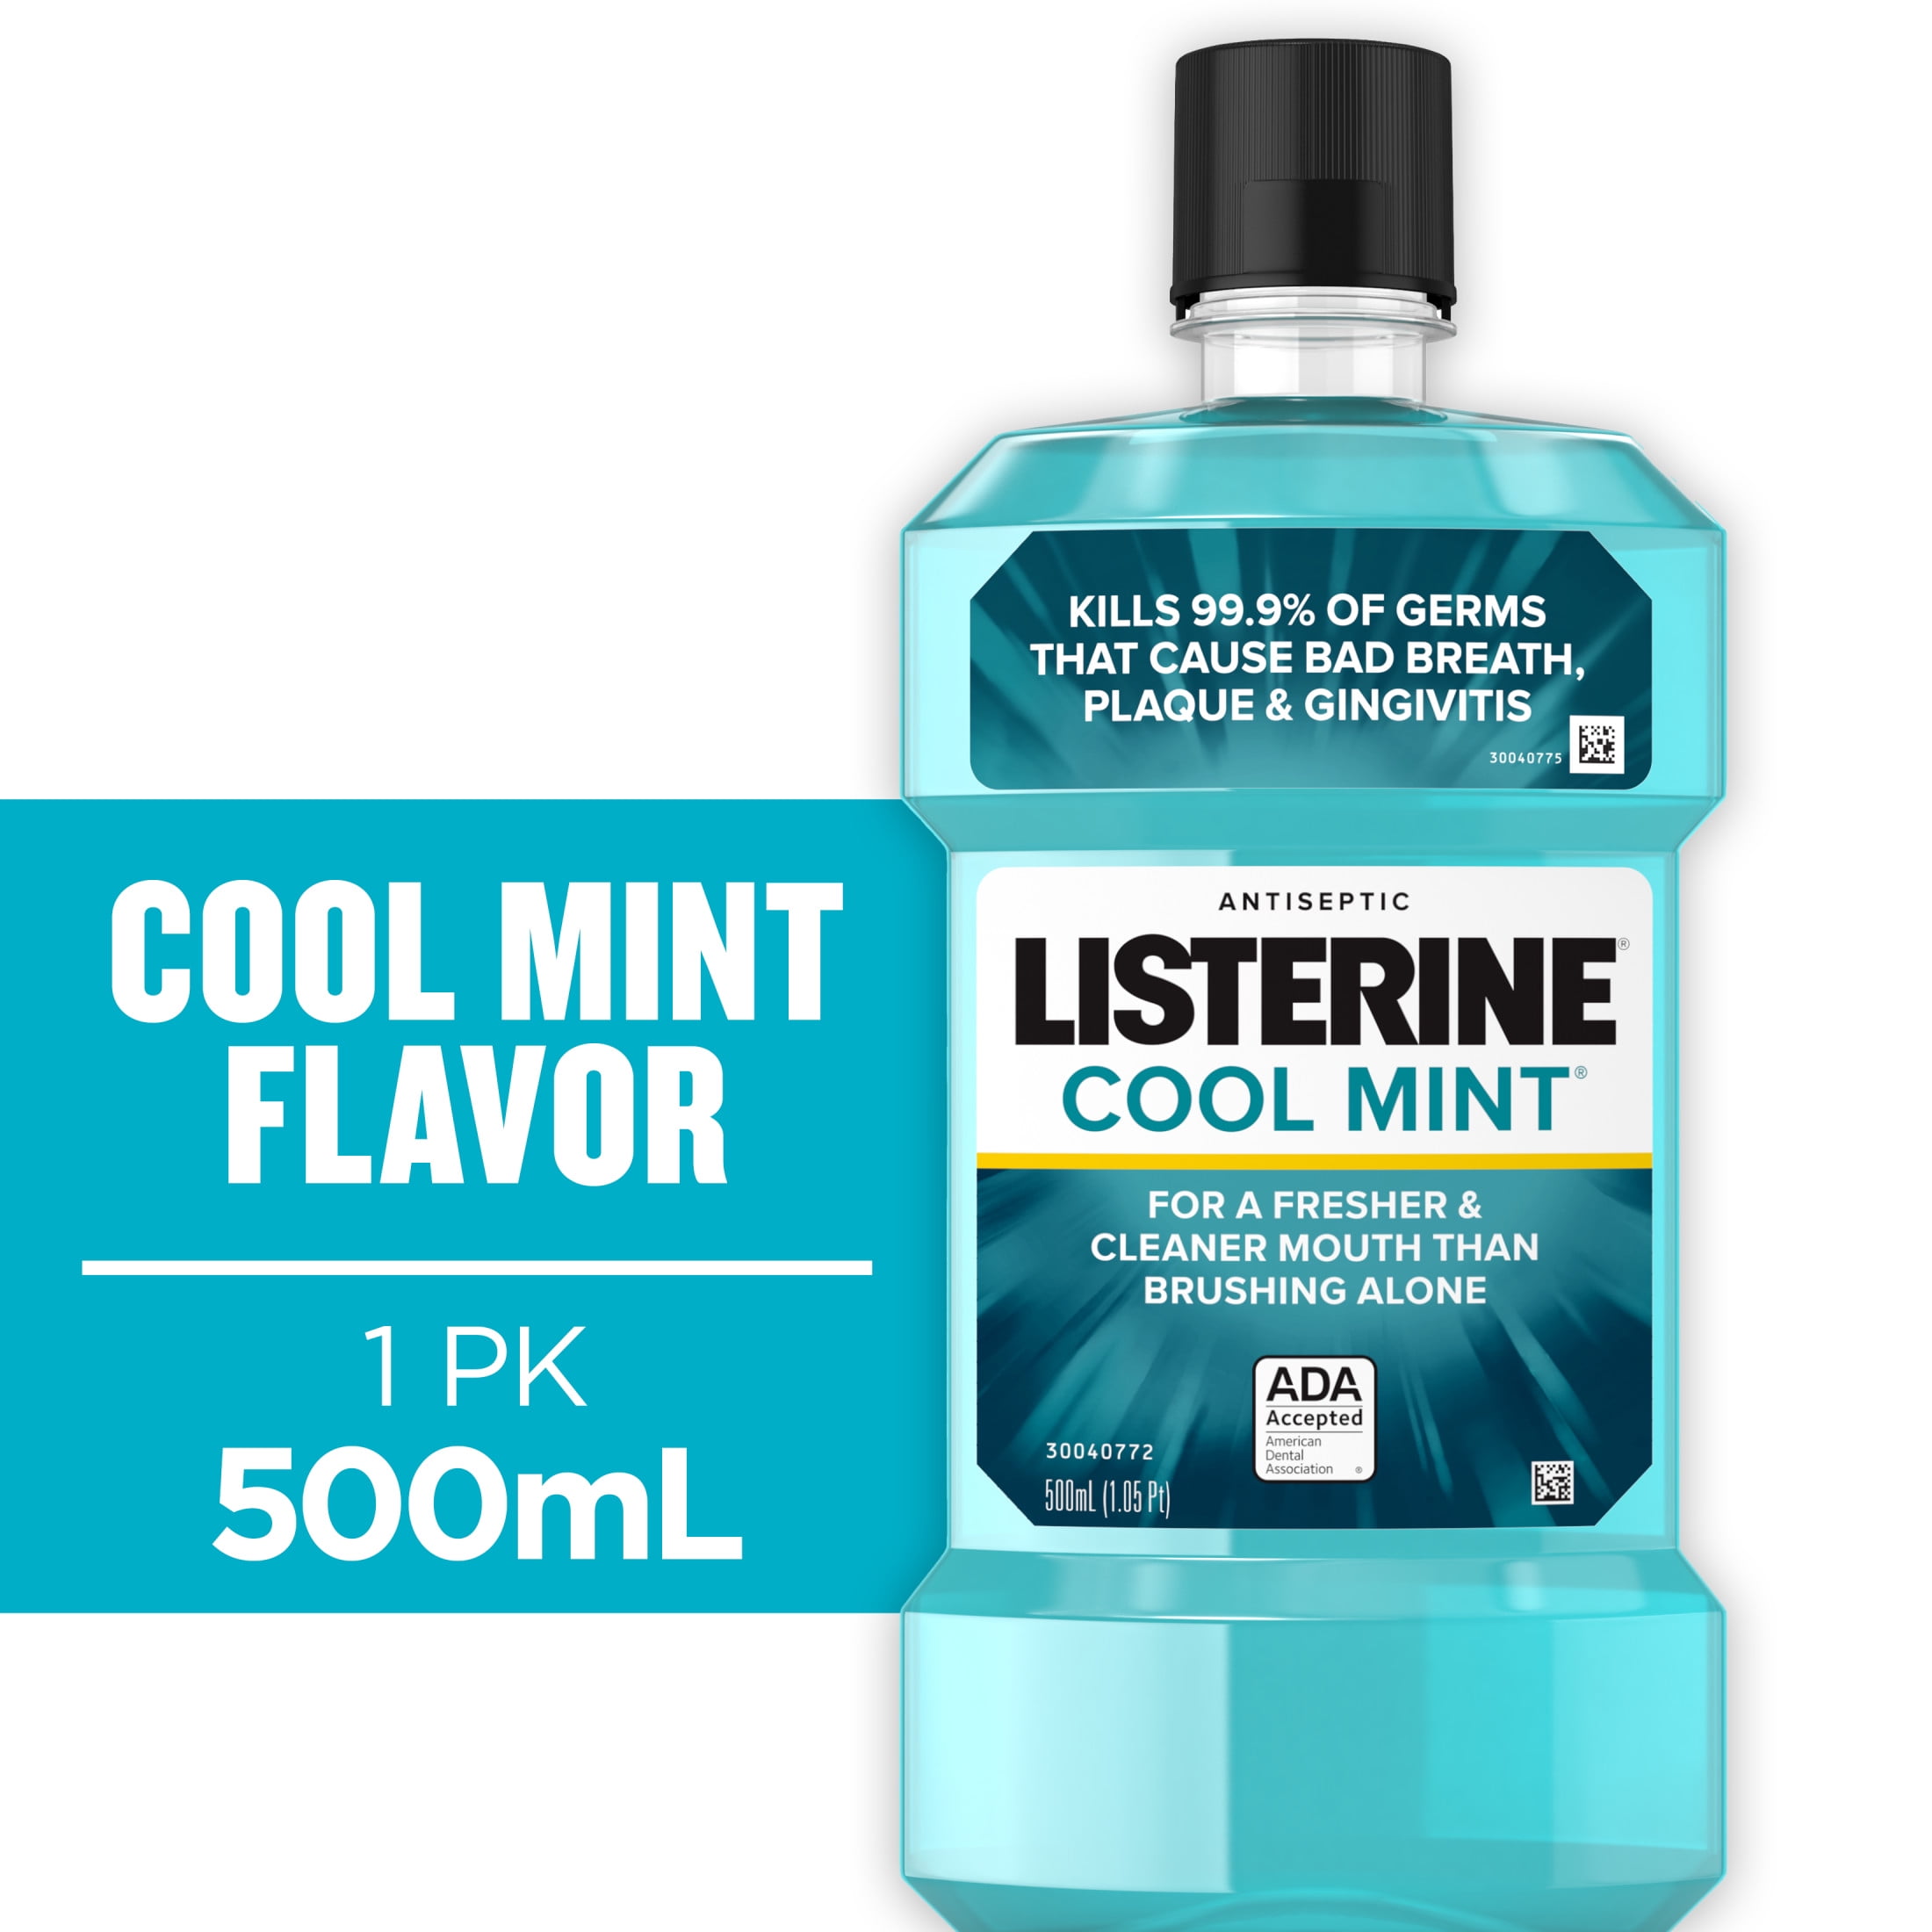 Listerine Antiseptic Mouthwash with Alcohol, Oral Care, Cool Mint